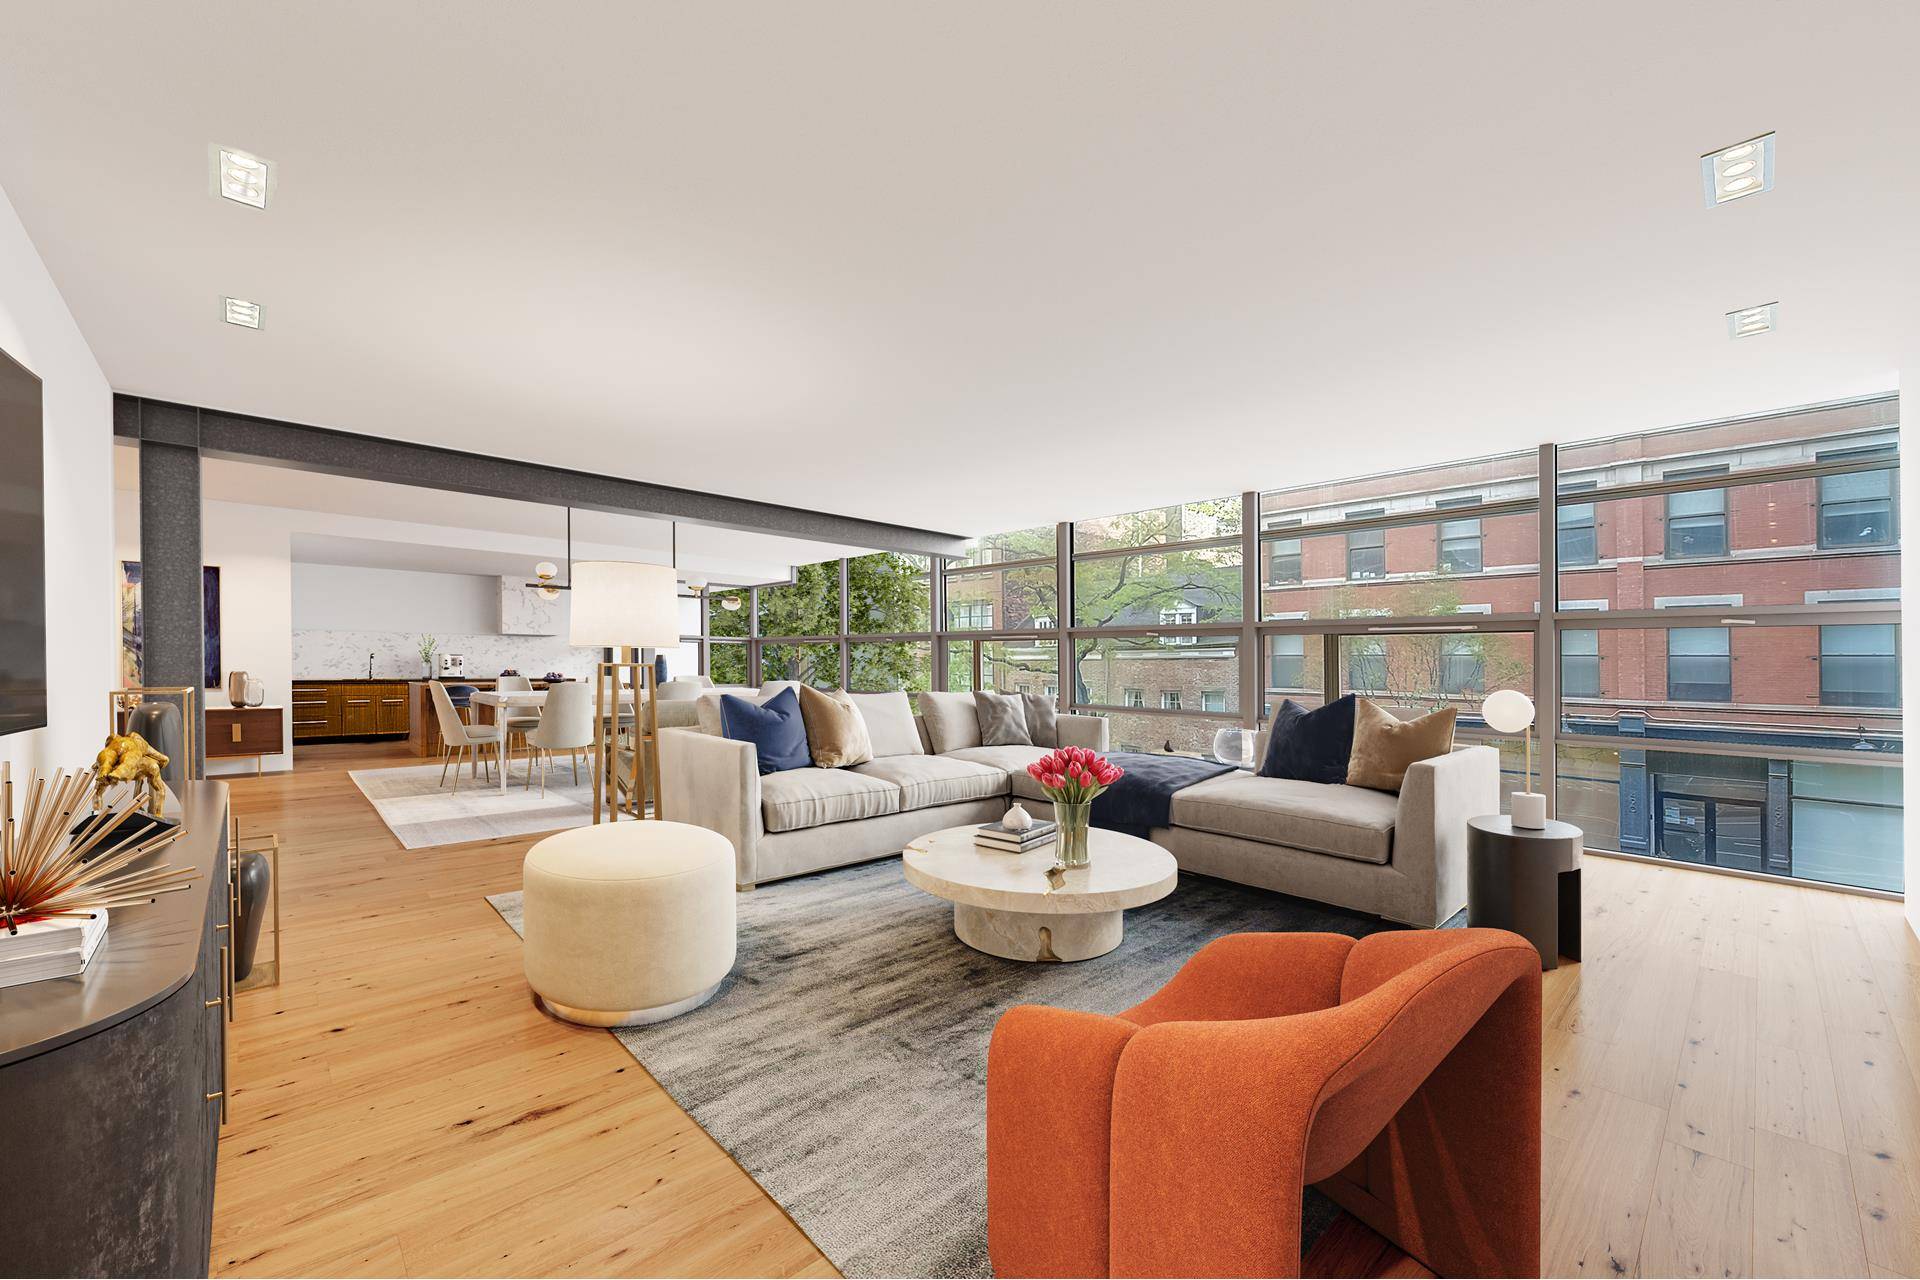 The Greenwich Street Project, designed by Dutch starchitect Winka Dubbledam is located in one of the most premiere neighborhoods NYC has to offer, steps from the heart of SoHo, TriBeca, ...